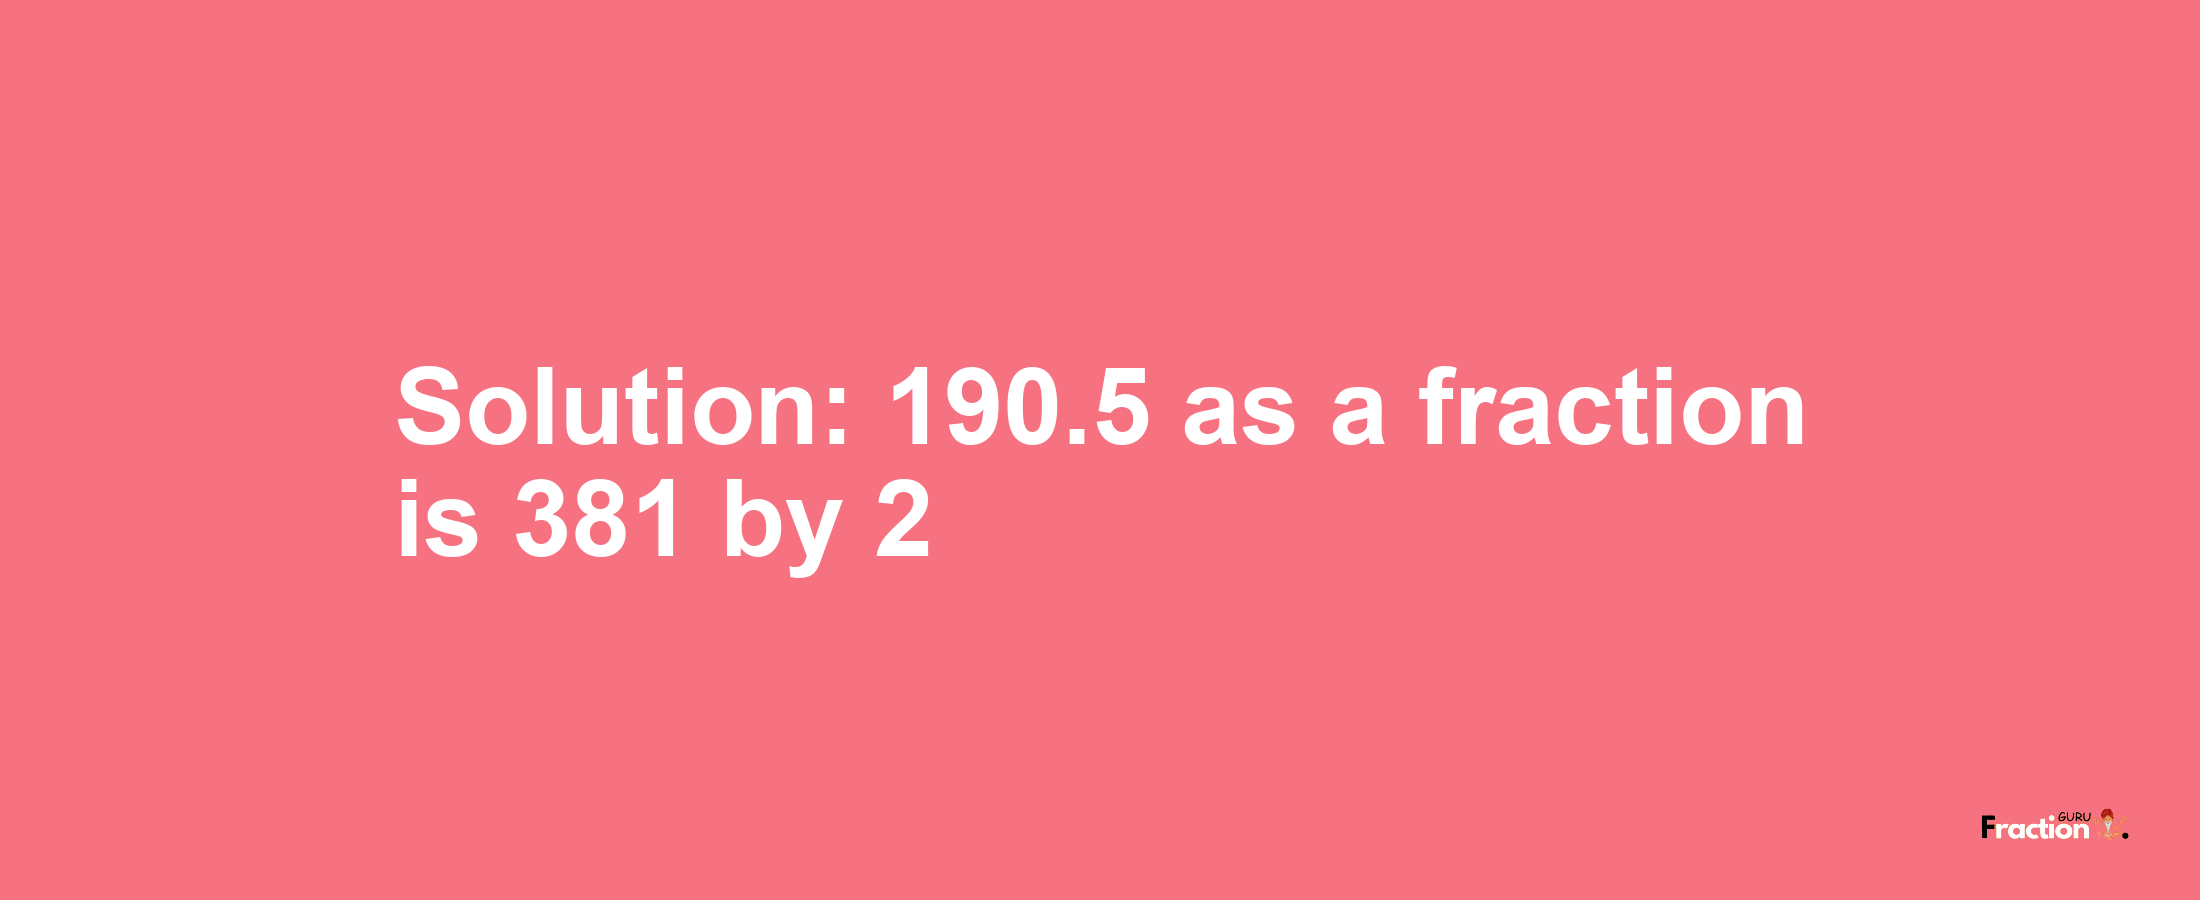 Solution:190.5 as a fraction is 381/2